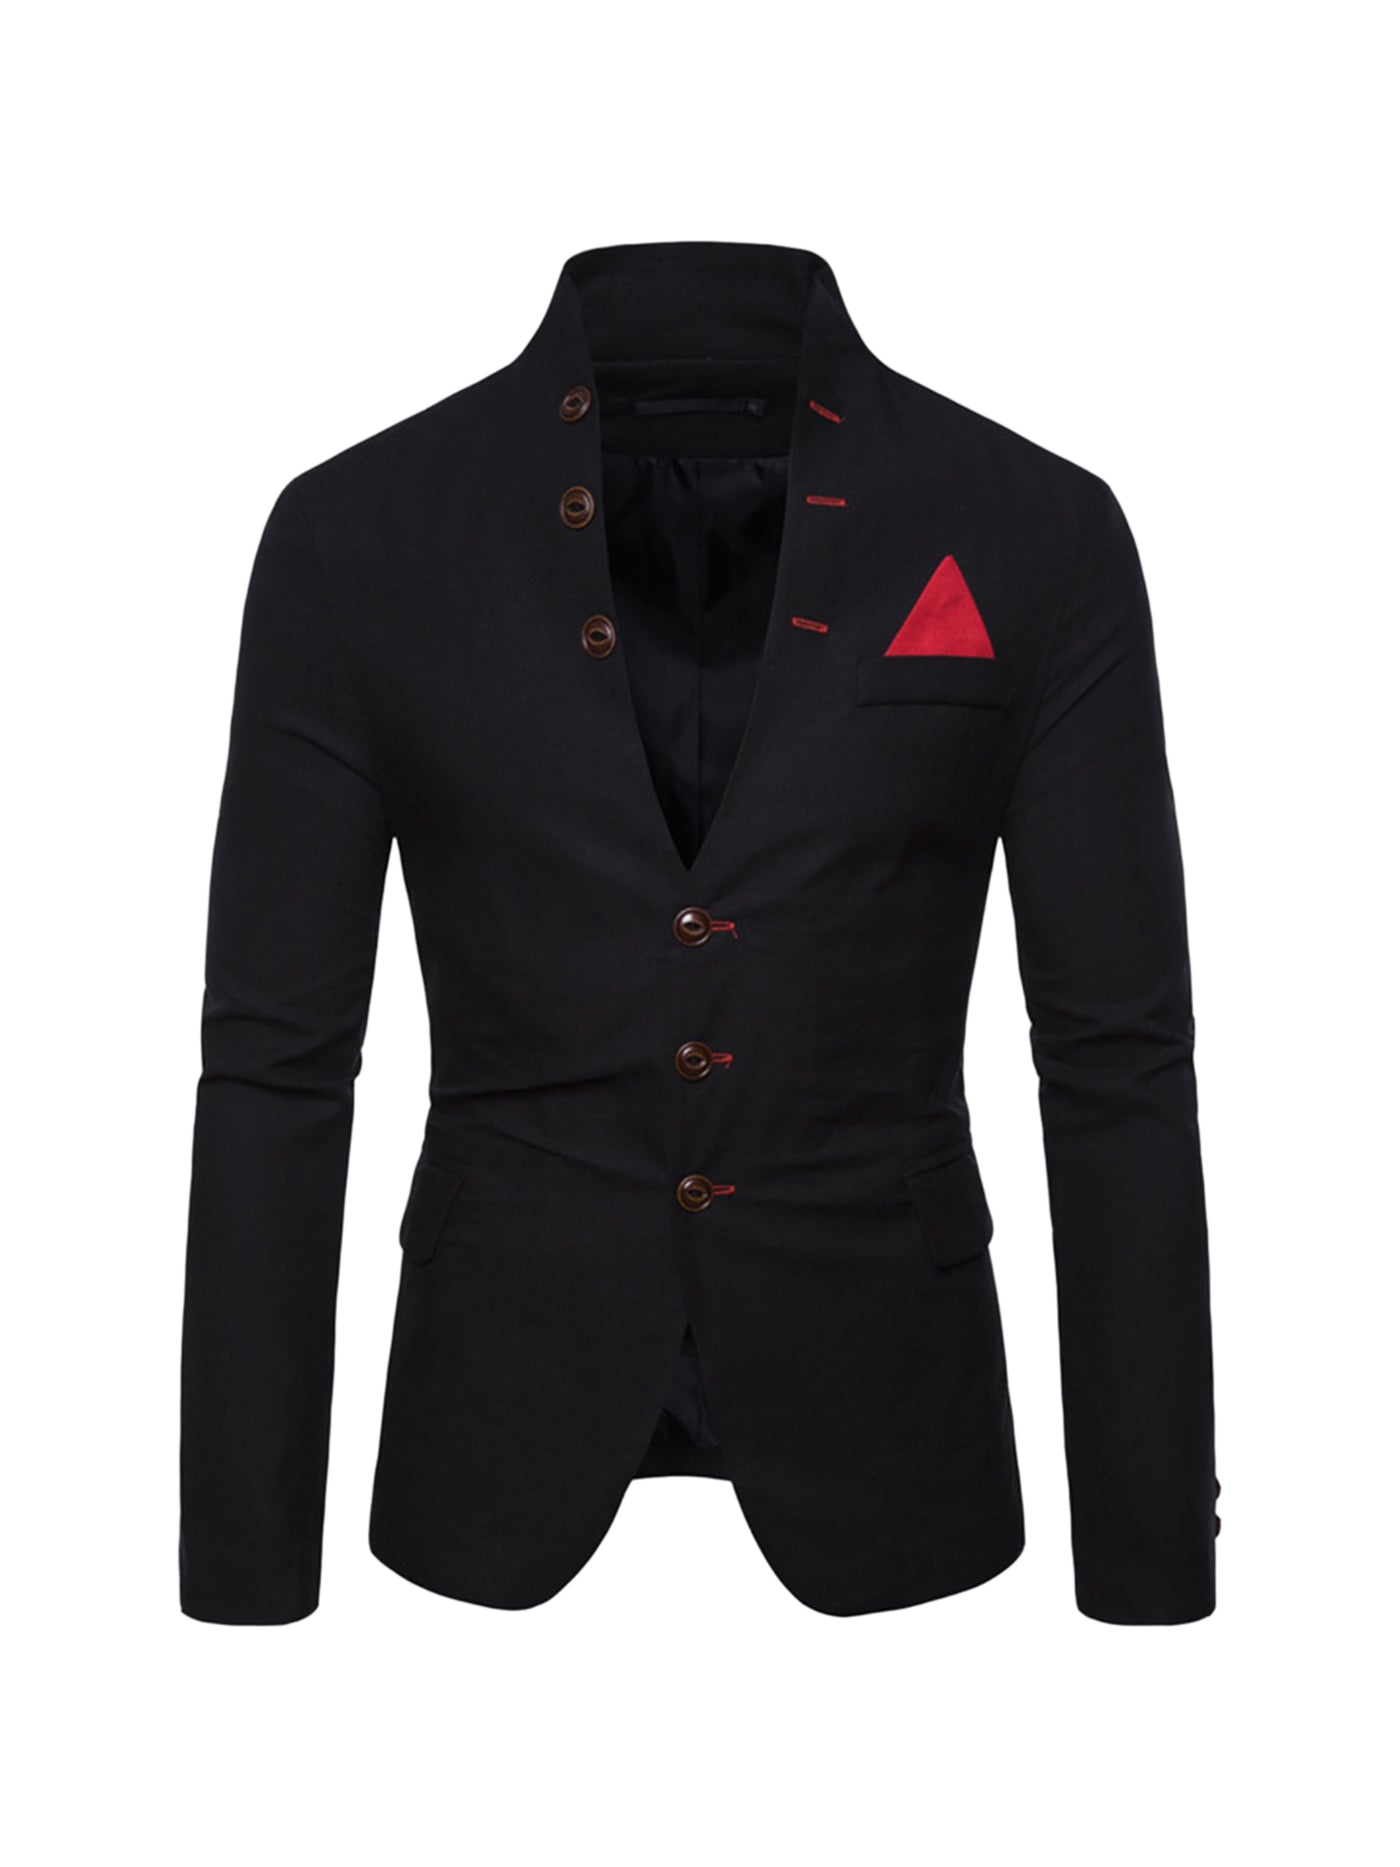 Bublédon Men's Stand Collar Blazer Slim Fit Single Breasted 3 Button Prom Suit Sports Coat